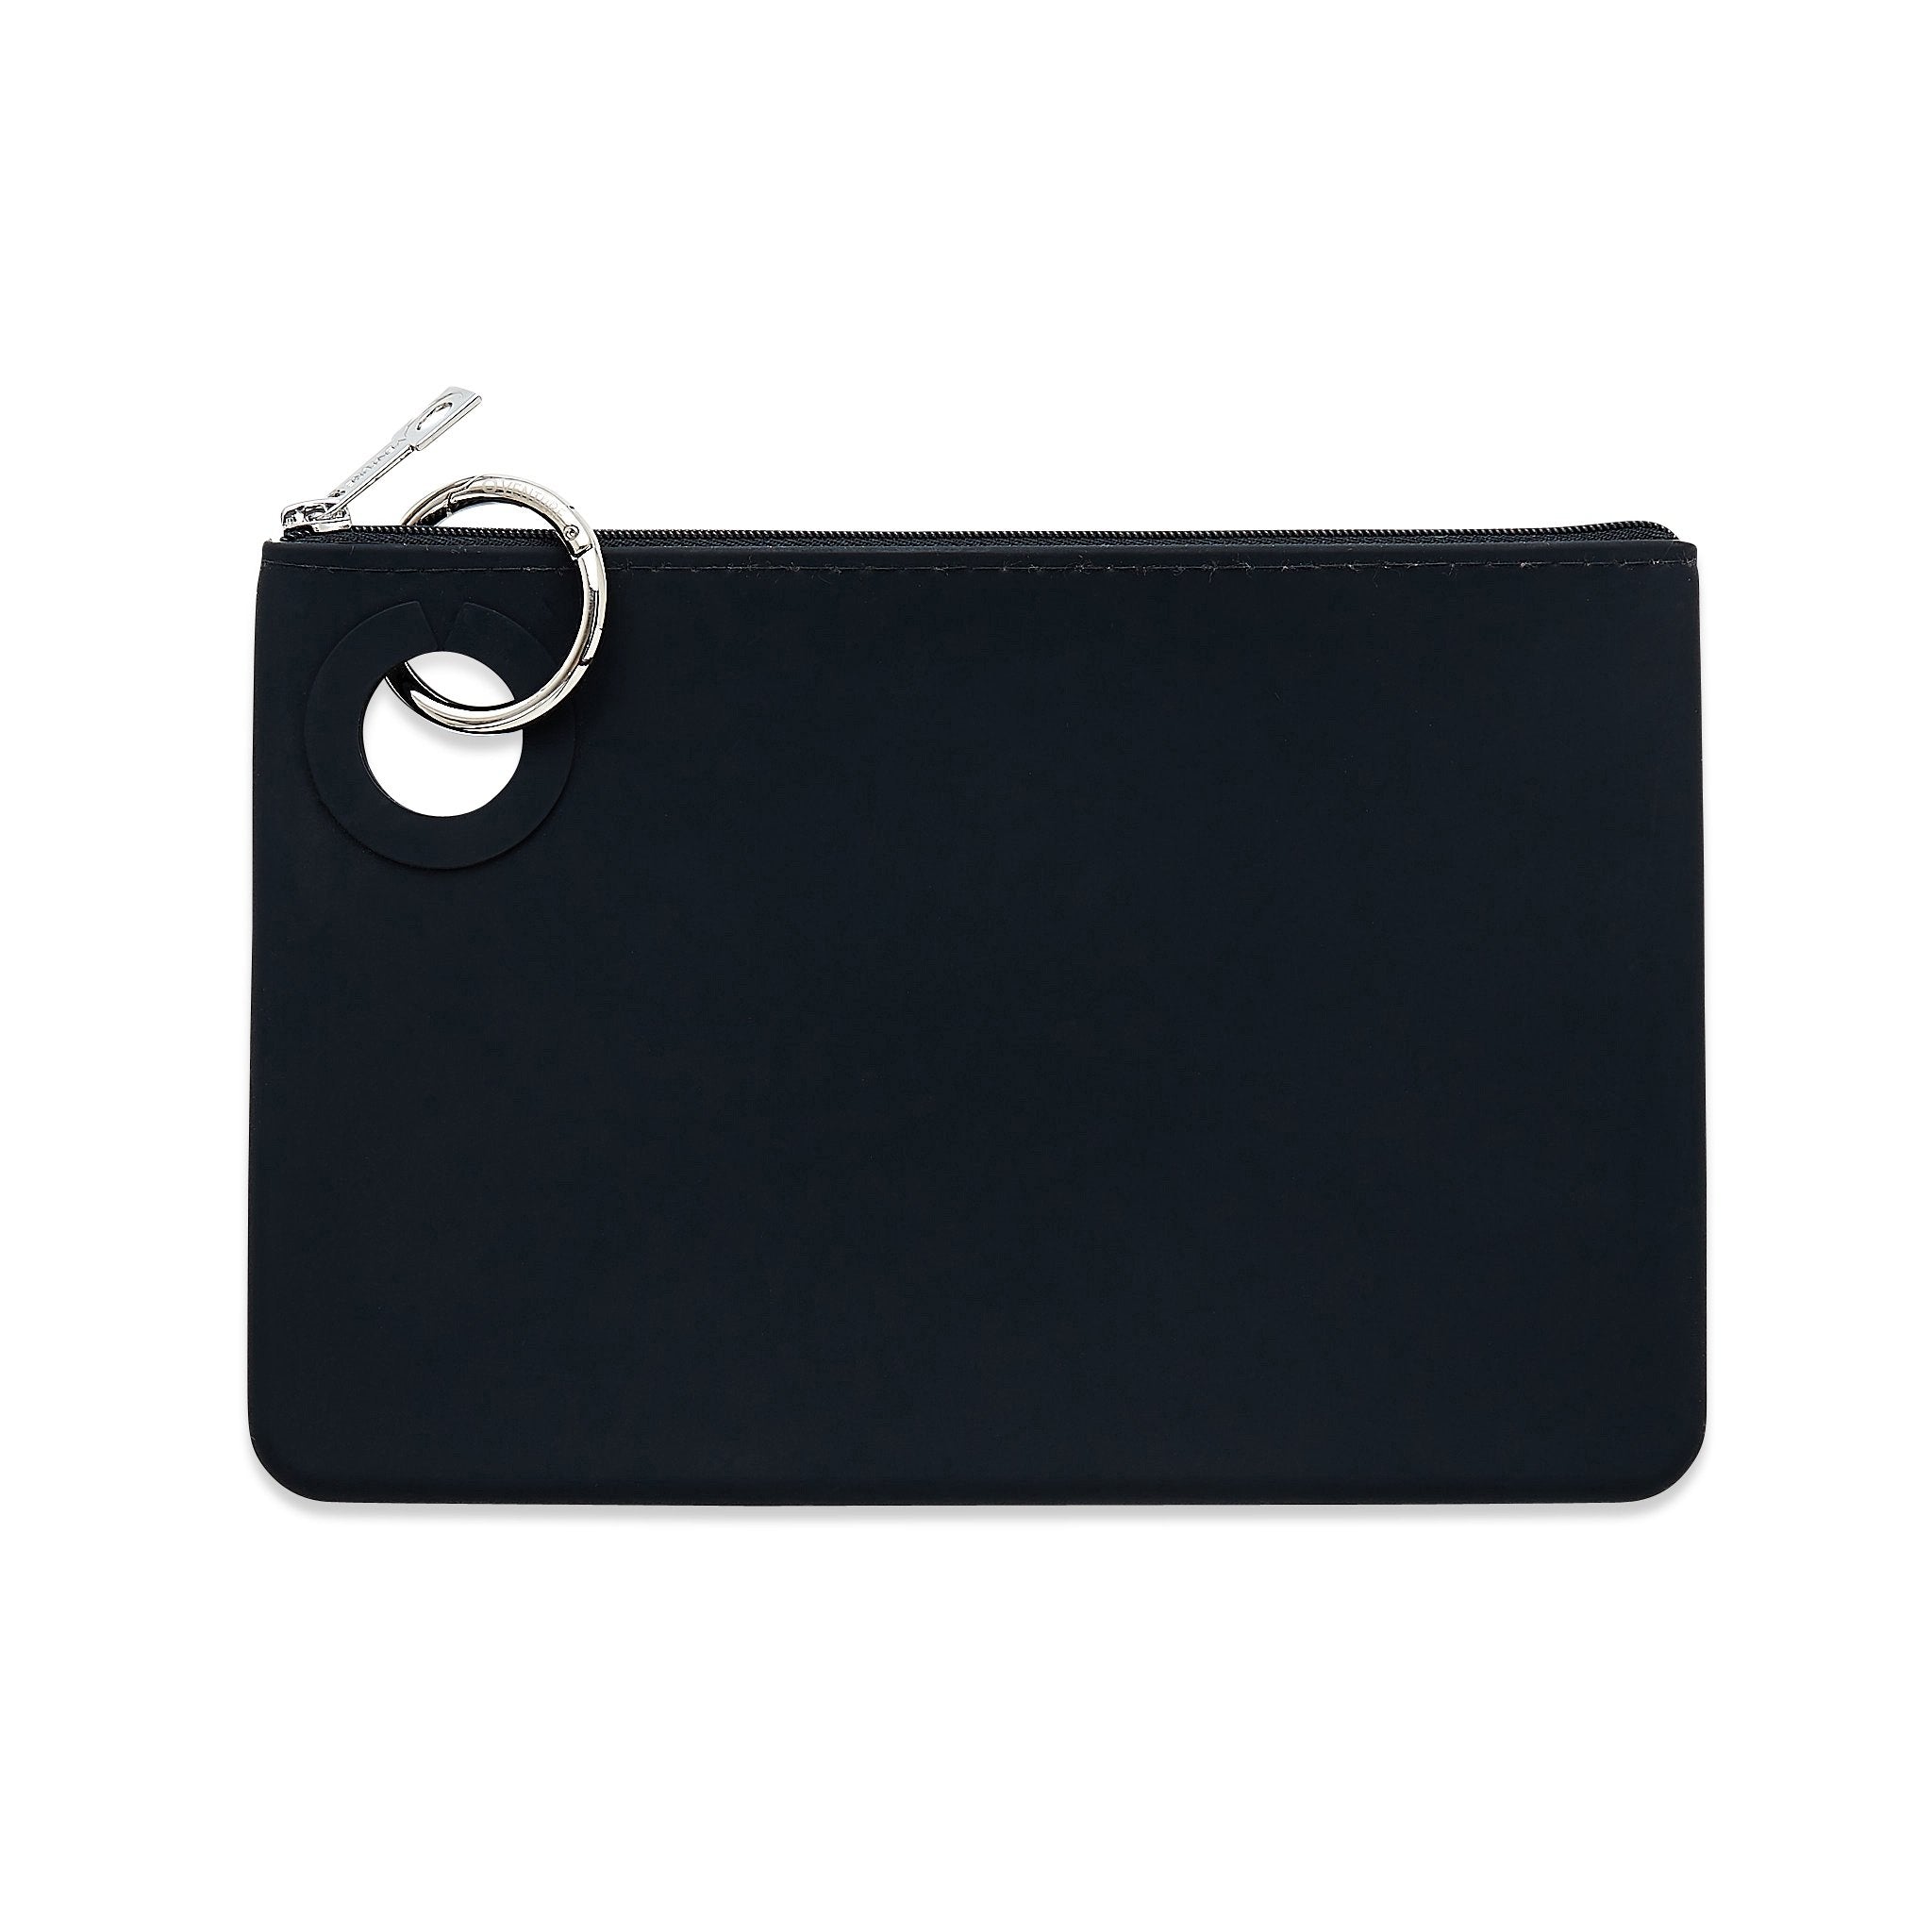 Buy back-in-blac Oventure Mini Silicone Pouch